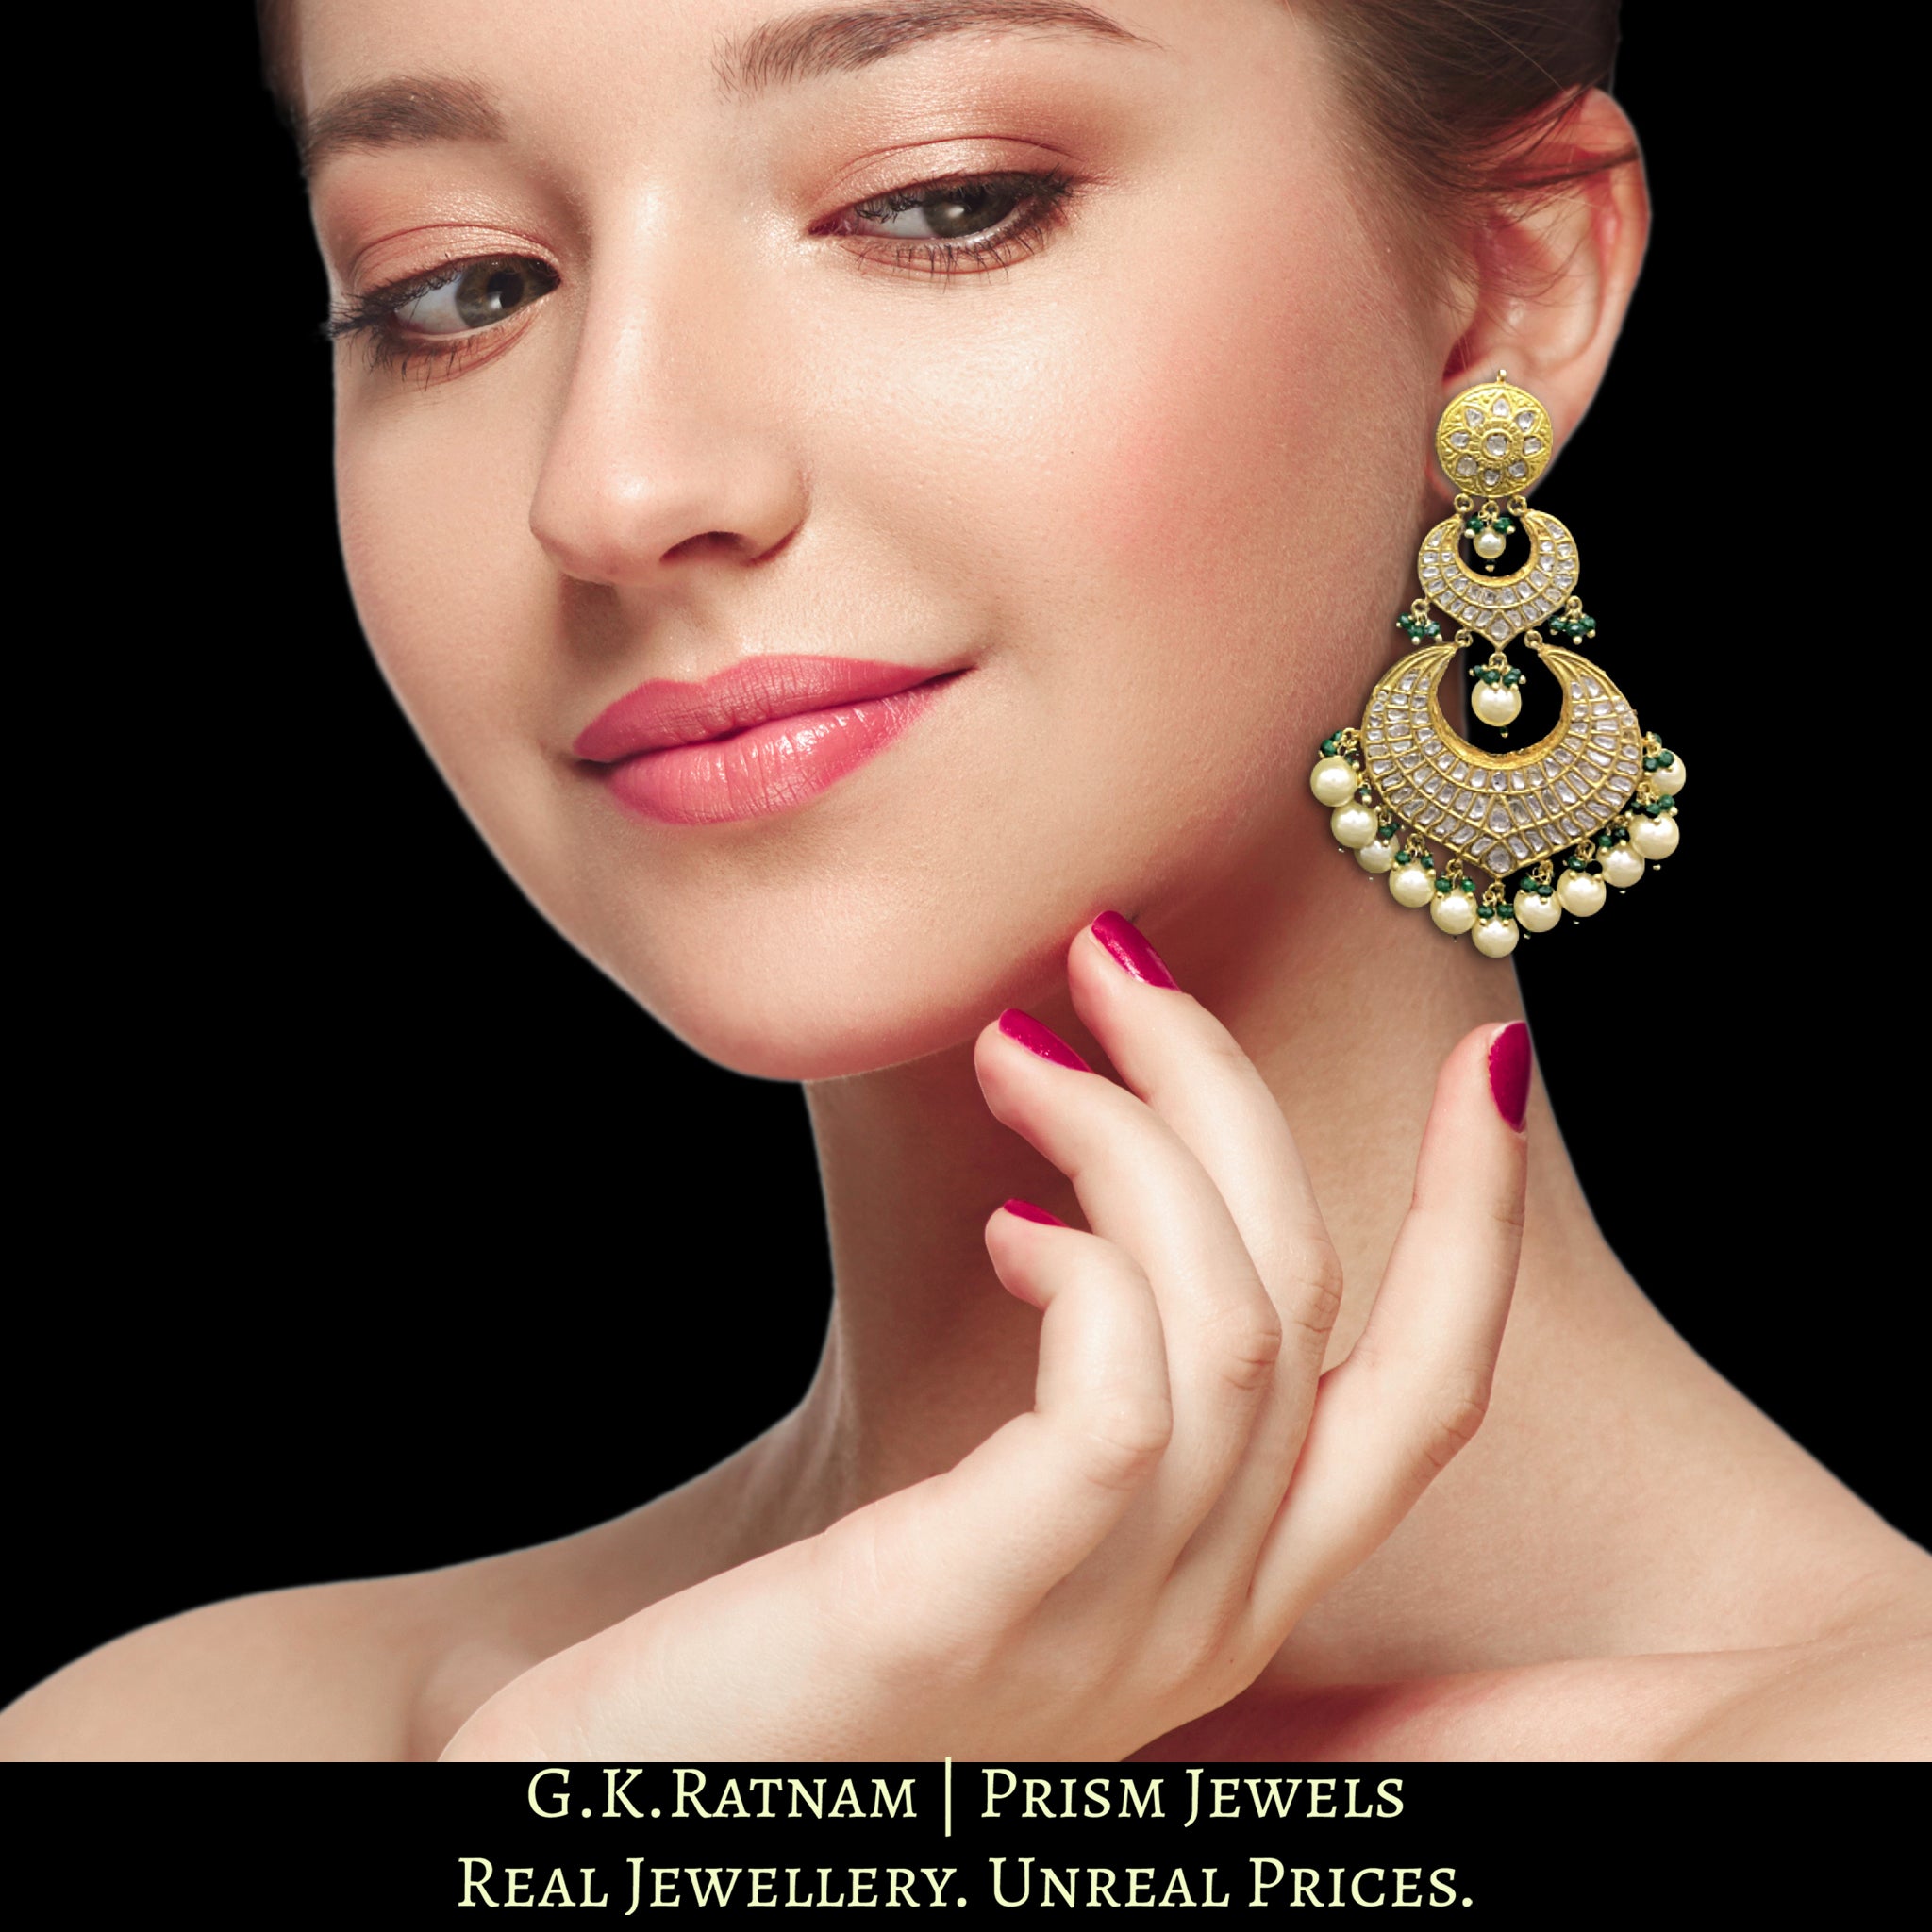 23k Gold and Diamond Polki paasa-style Long Chand Bali Earring Pair in shell pearls with a hint of green